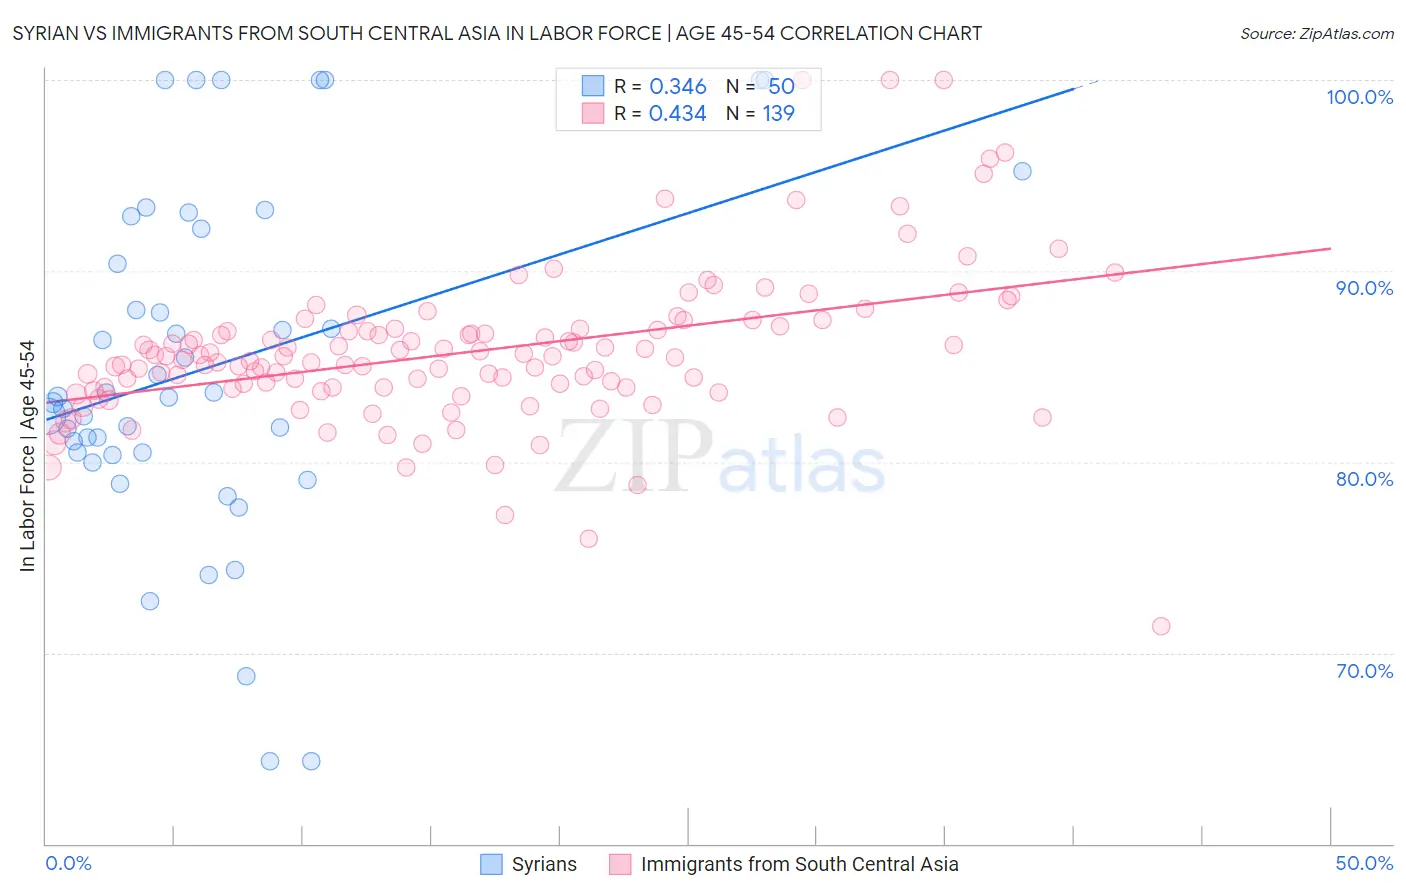 Syrian vs Immigrants from South Central Asia In Labor Force | Age 45-54